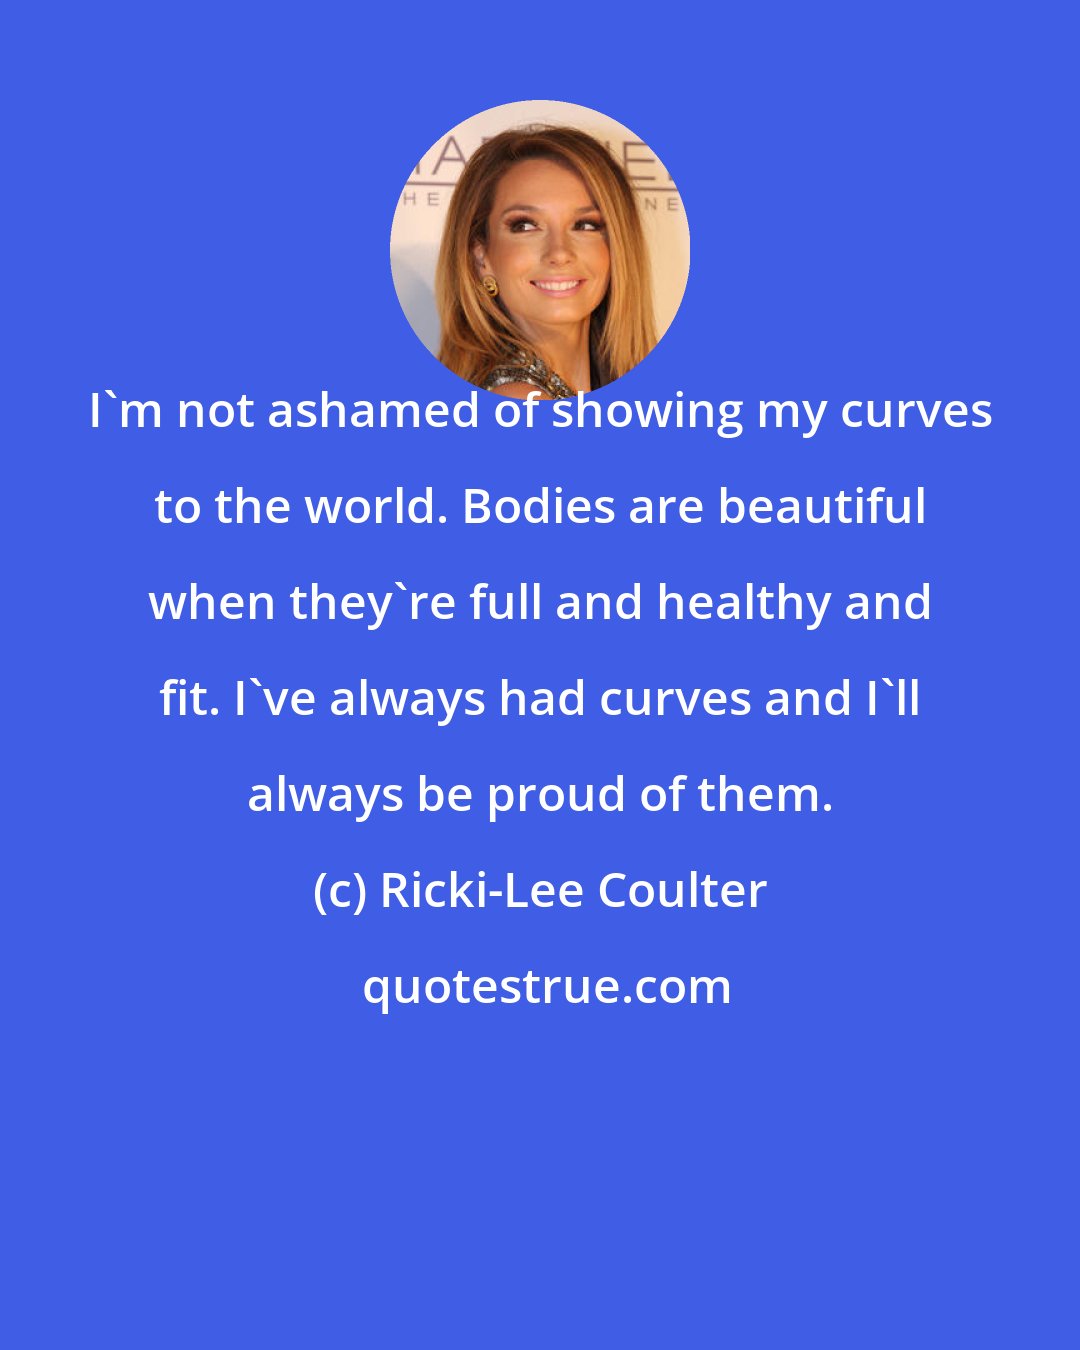 Ricki-Lee Coulter: I'm not ashamed of showing my curves to the world. Bodies are beautiful when they're full and healthy and fit. I've always had curves and I'll always be proud of them.